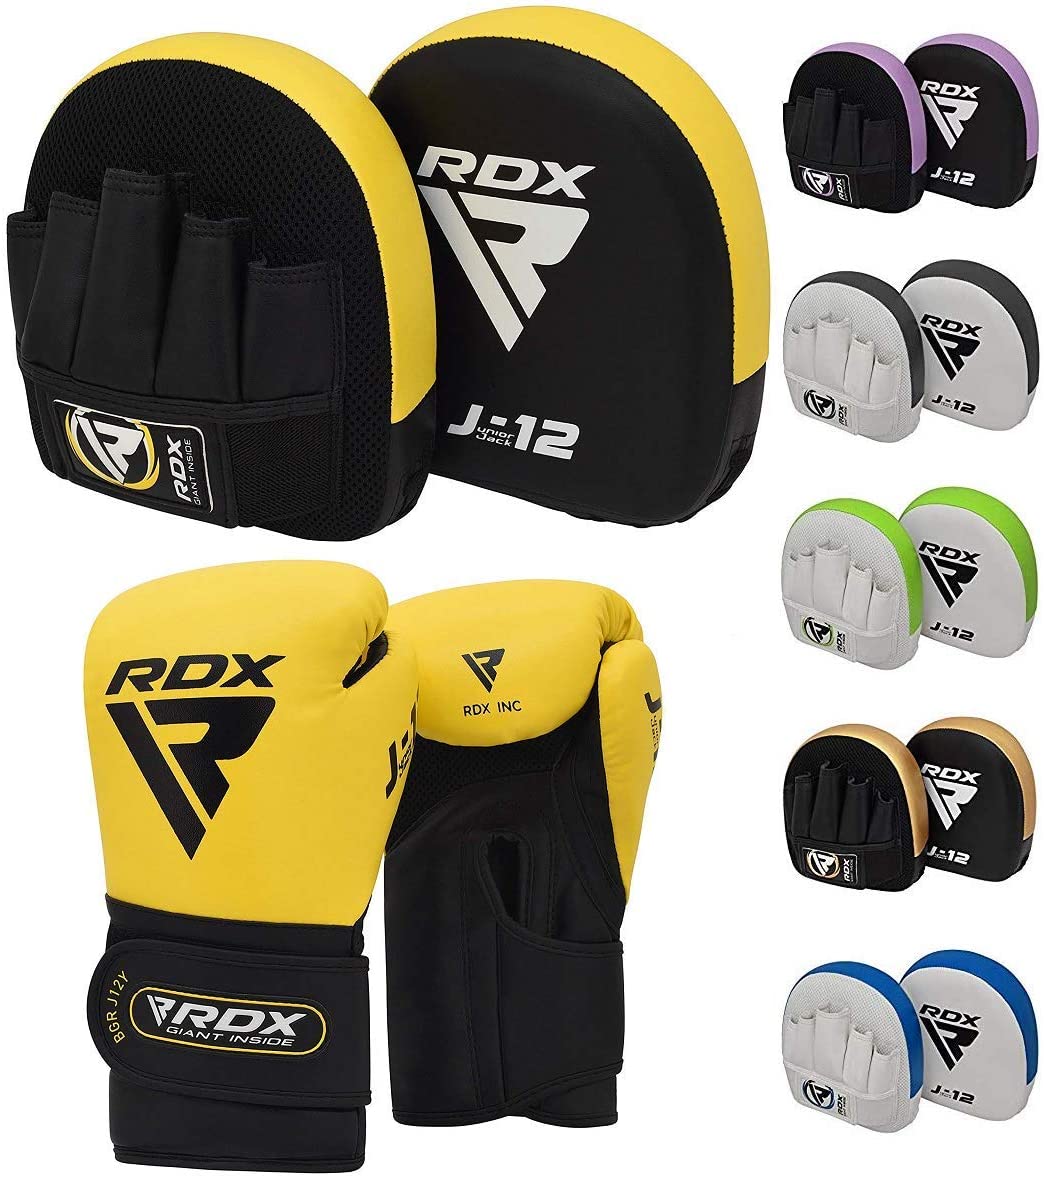 Karate and Kickboxing Training Martial Arts Boxercise RDX Kids Boxing Pads and Gloves Set Muay Thai Junior Hand Shield for MMA Youth Hook and Jab Target Focus Mitts with Punching Gloves